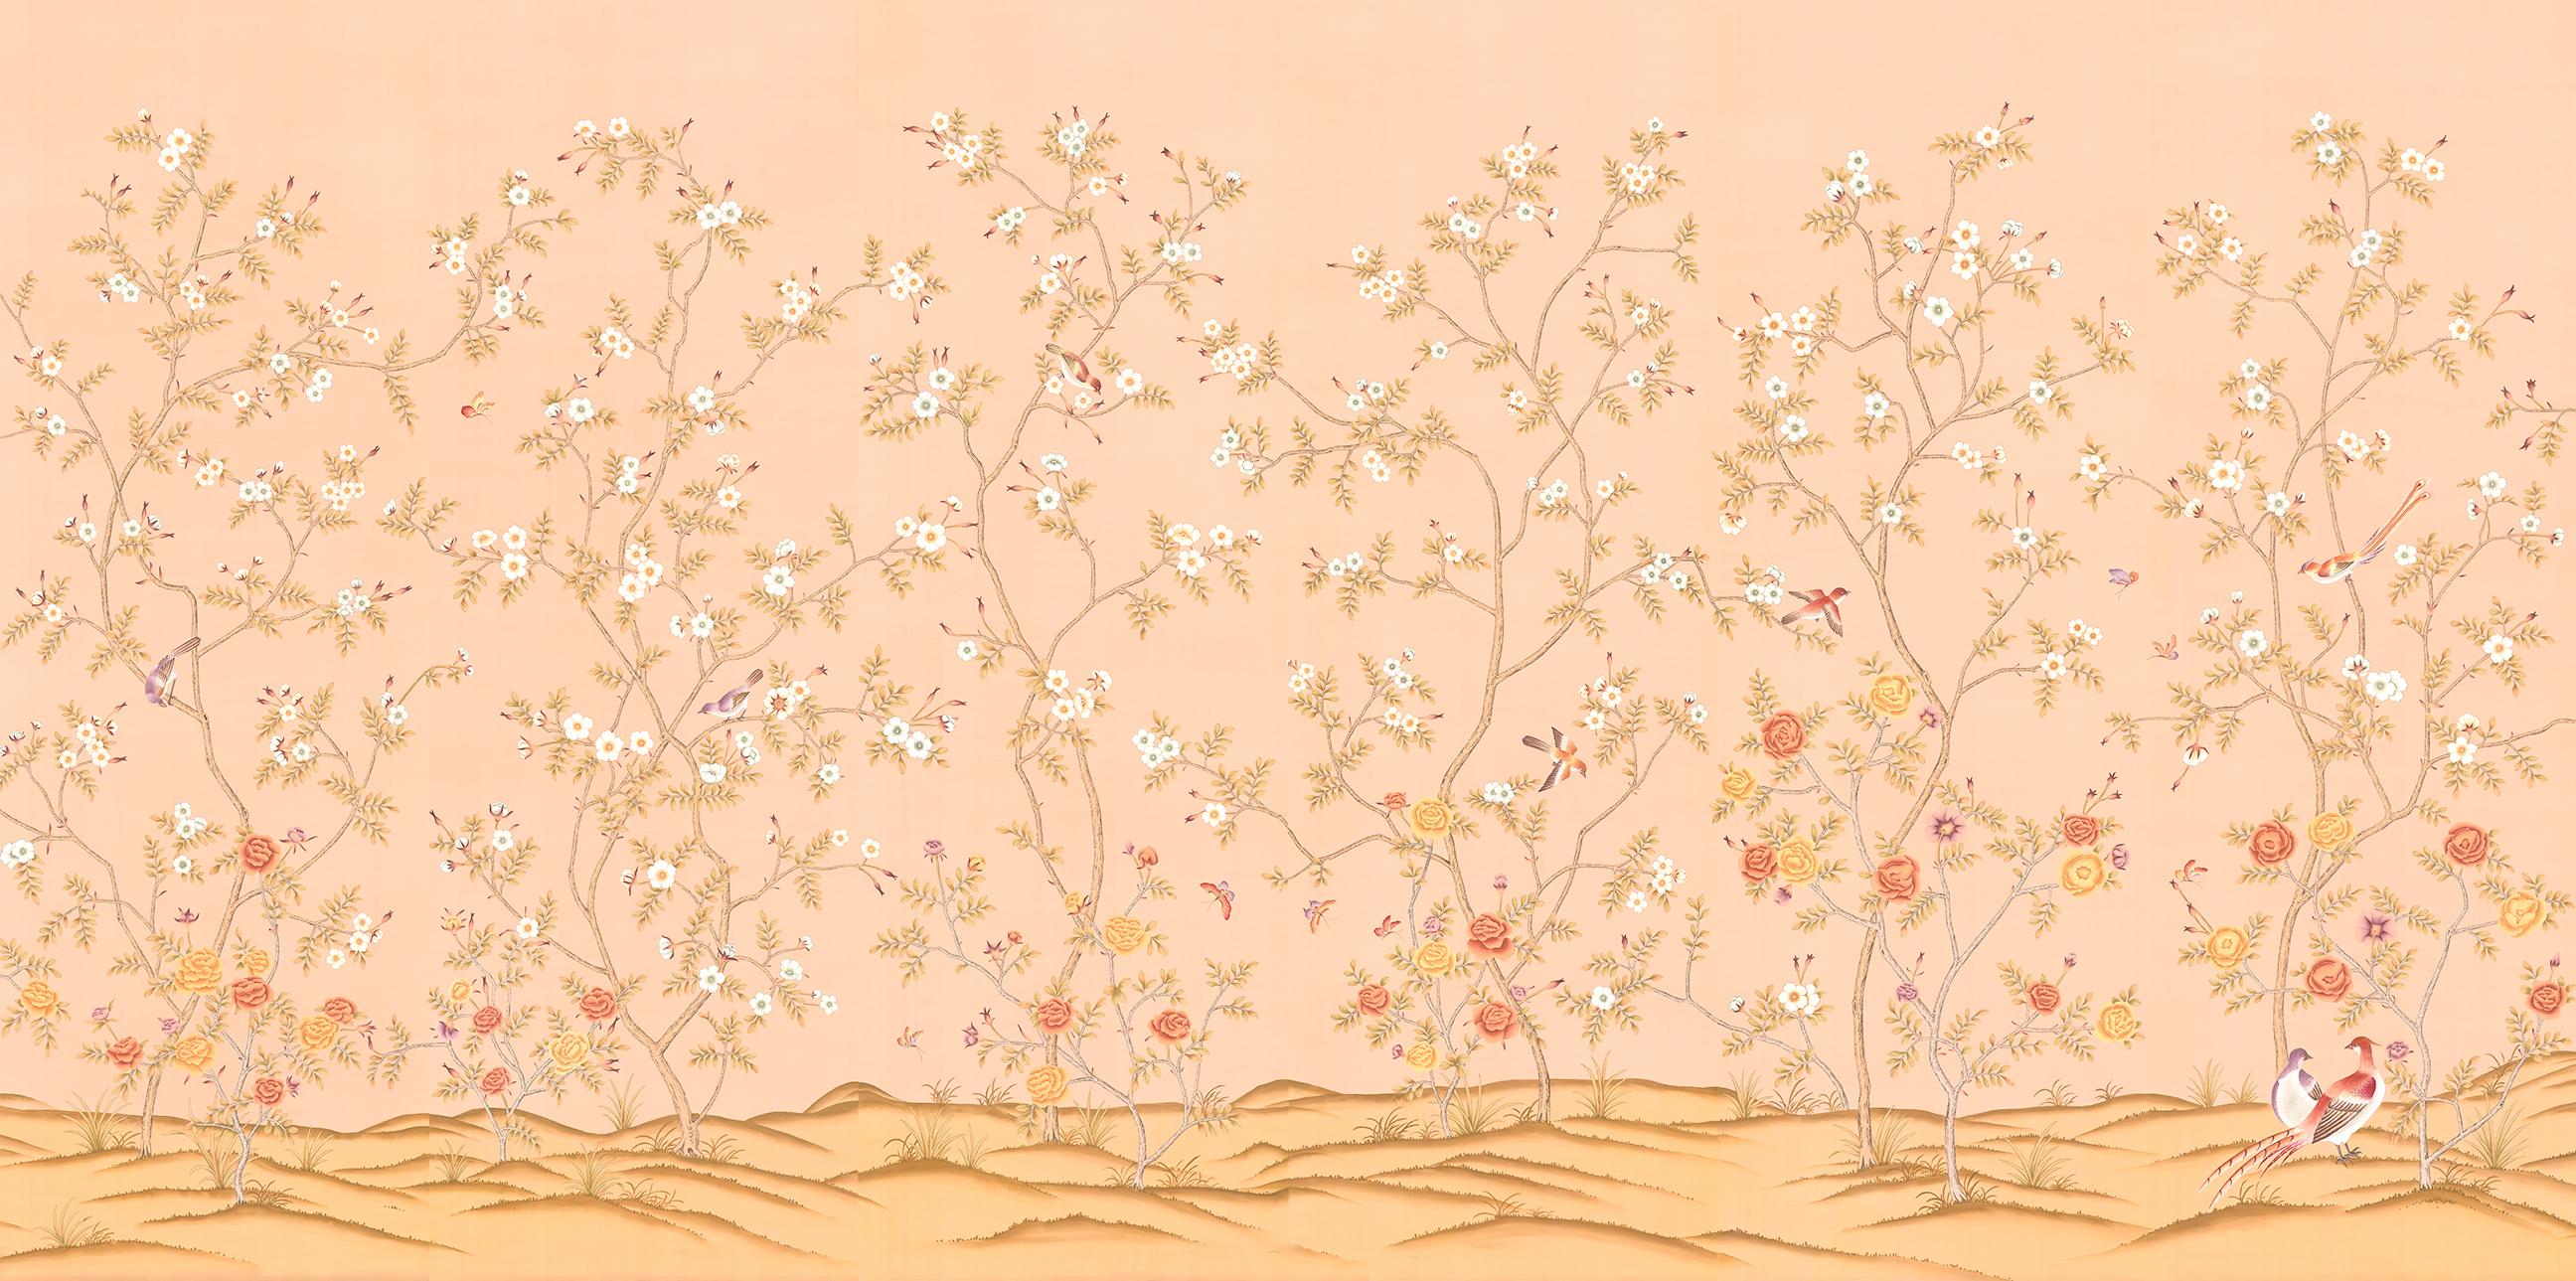 Rose Garden is an elegant mural that celebrates the beauty of a variety of roses with song birds. The mural is hand painted in the ancient chinoiserie art style. The full mural is made up of a series of individual panels, each 3 feet wide. The tops